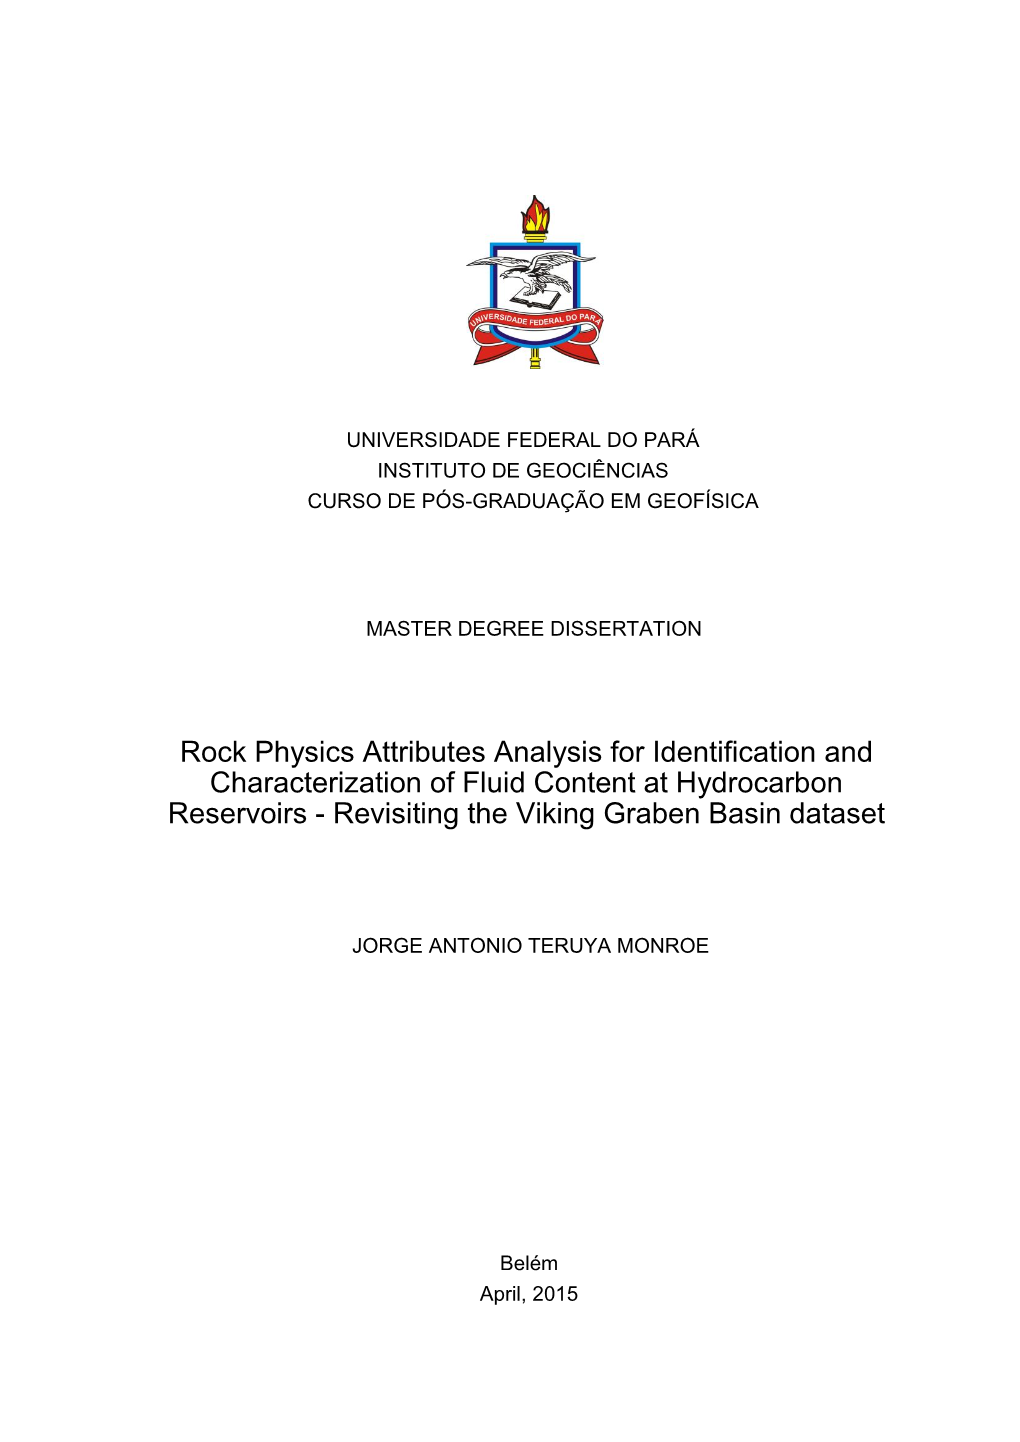 Rock Physics Attributes Analysis for Identification and Characterization of Fluid Content at Hydrocarbon Reservoirs - Revisiting the Viking Graben Basin Dataset